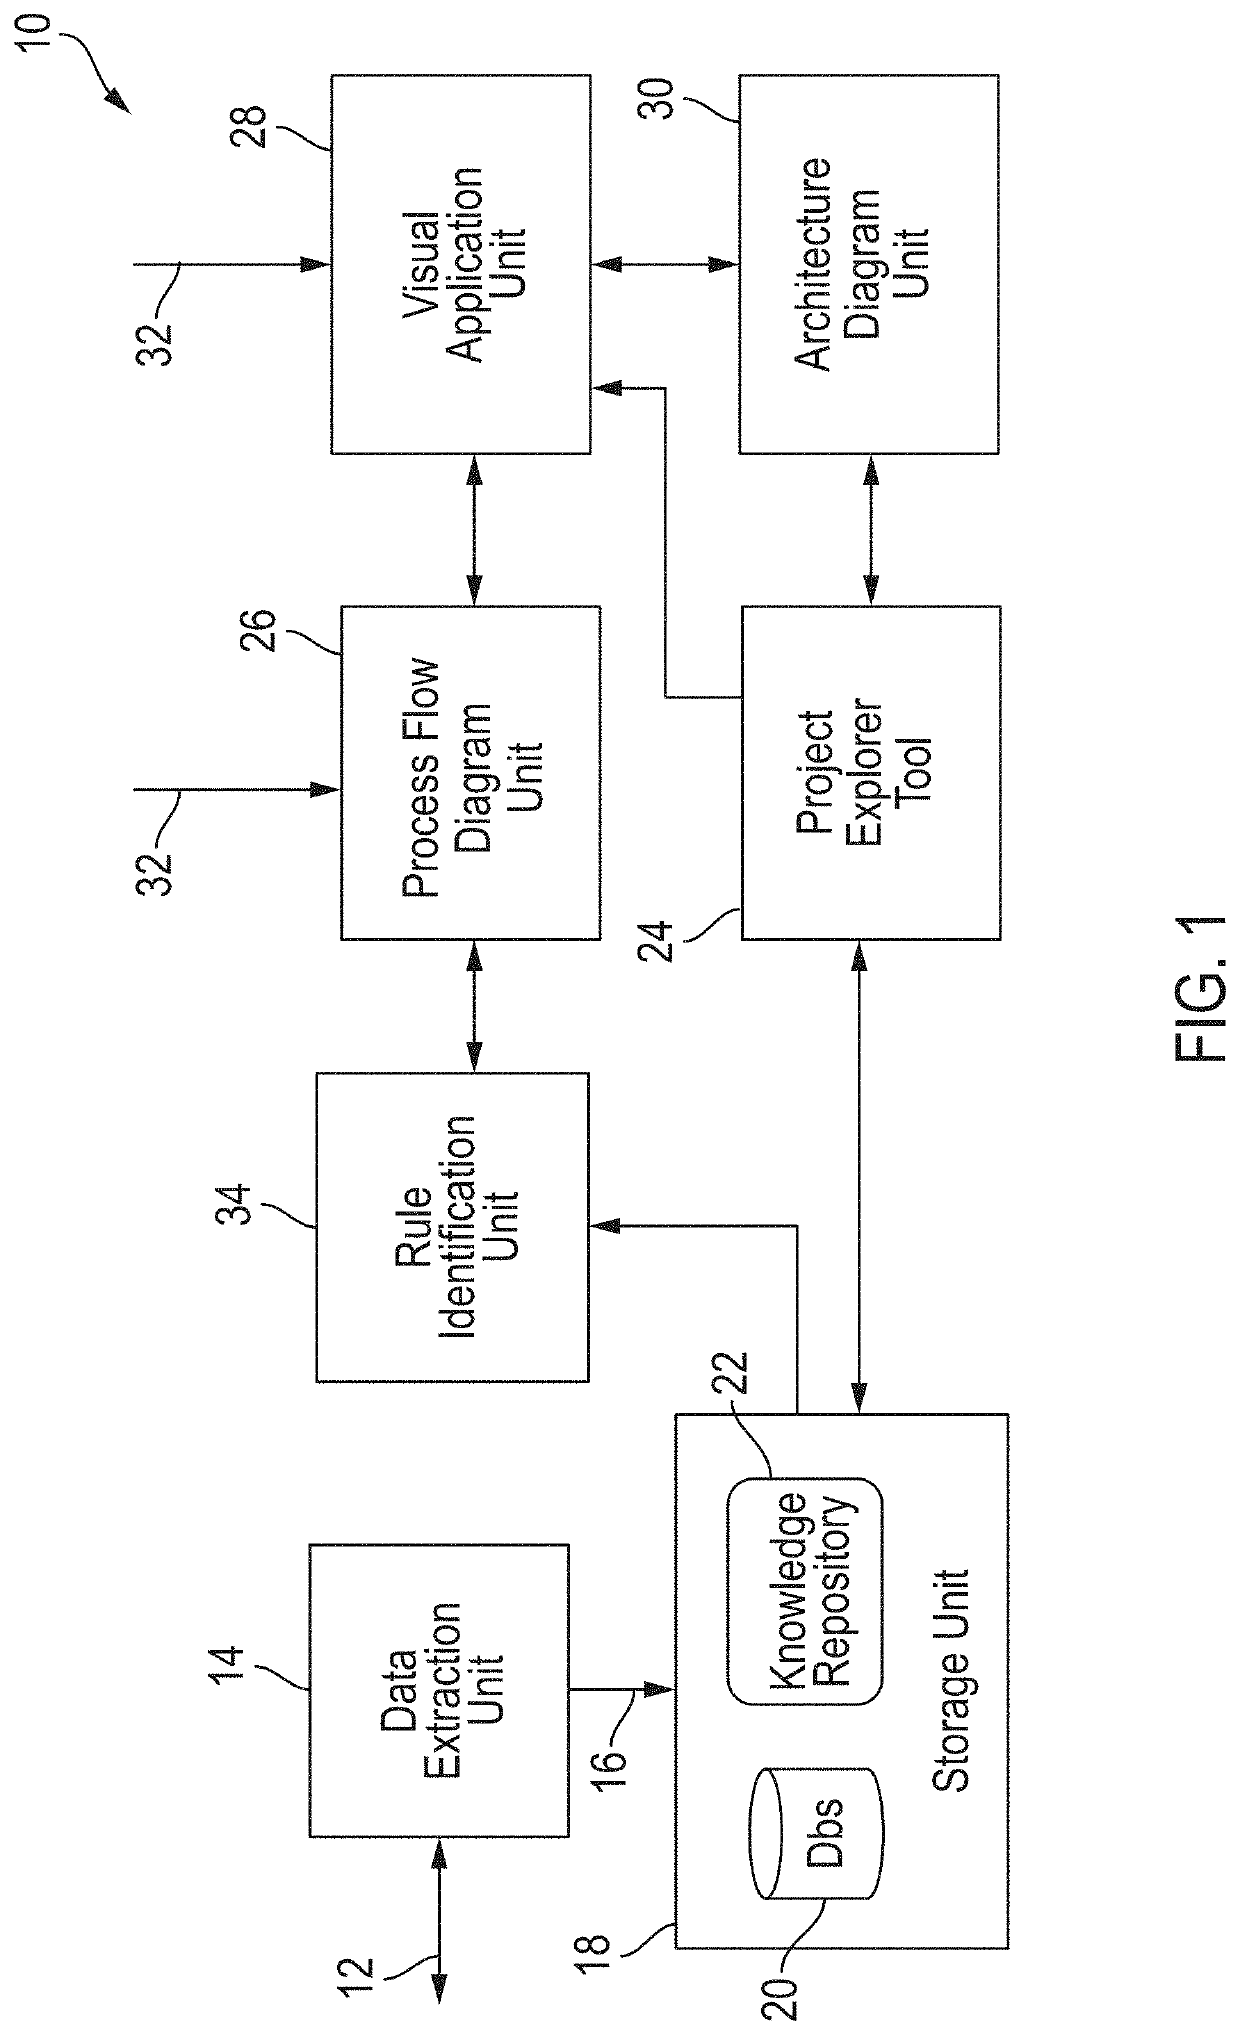 System and method for creating a process flow diagram which incorporates knowledge of business rules